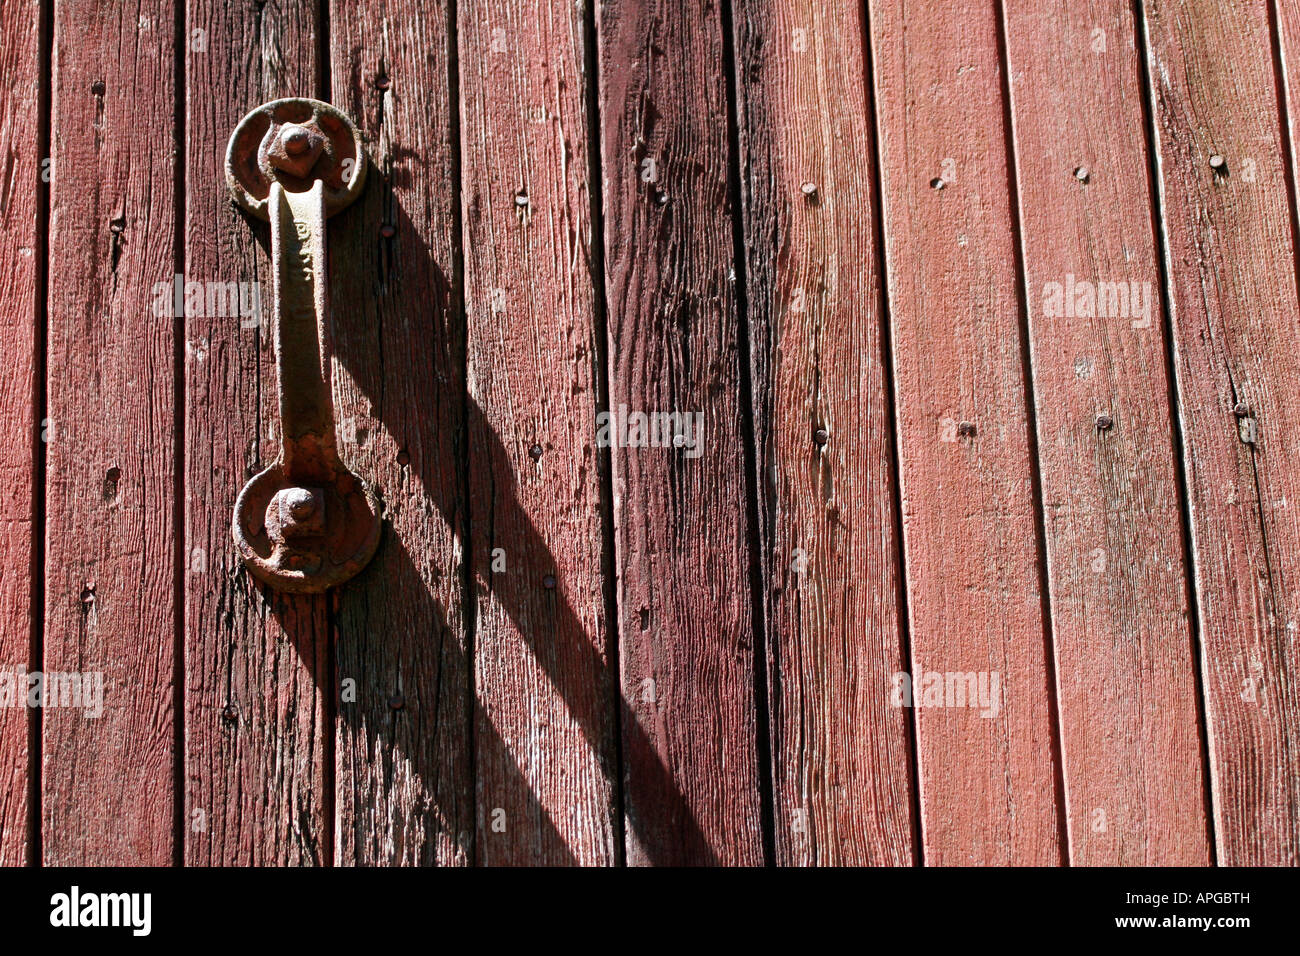 Old weathered wooden red door with metal handle on a freight train railcar or boxcar Stock Photo